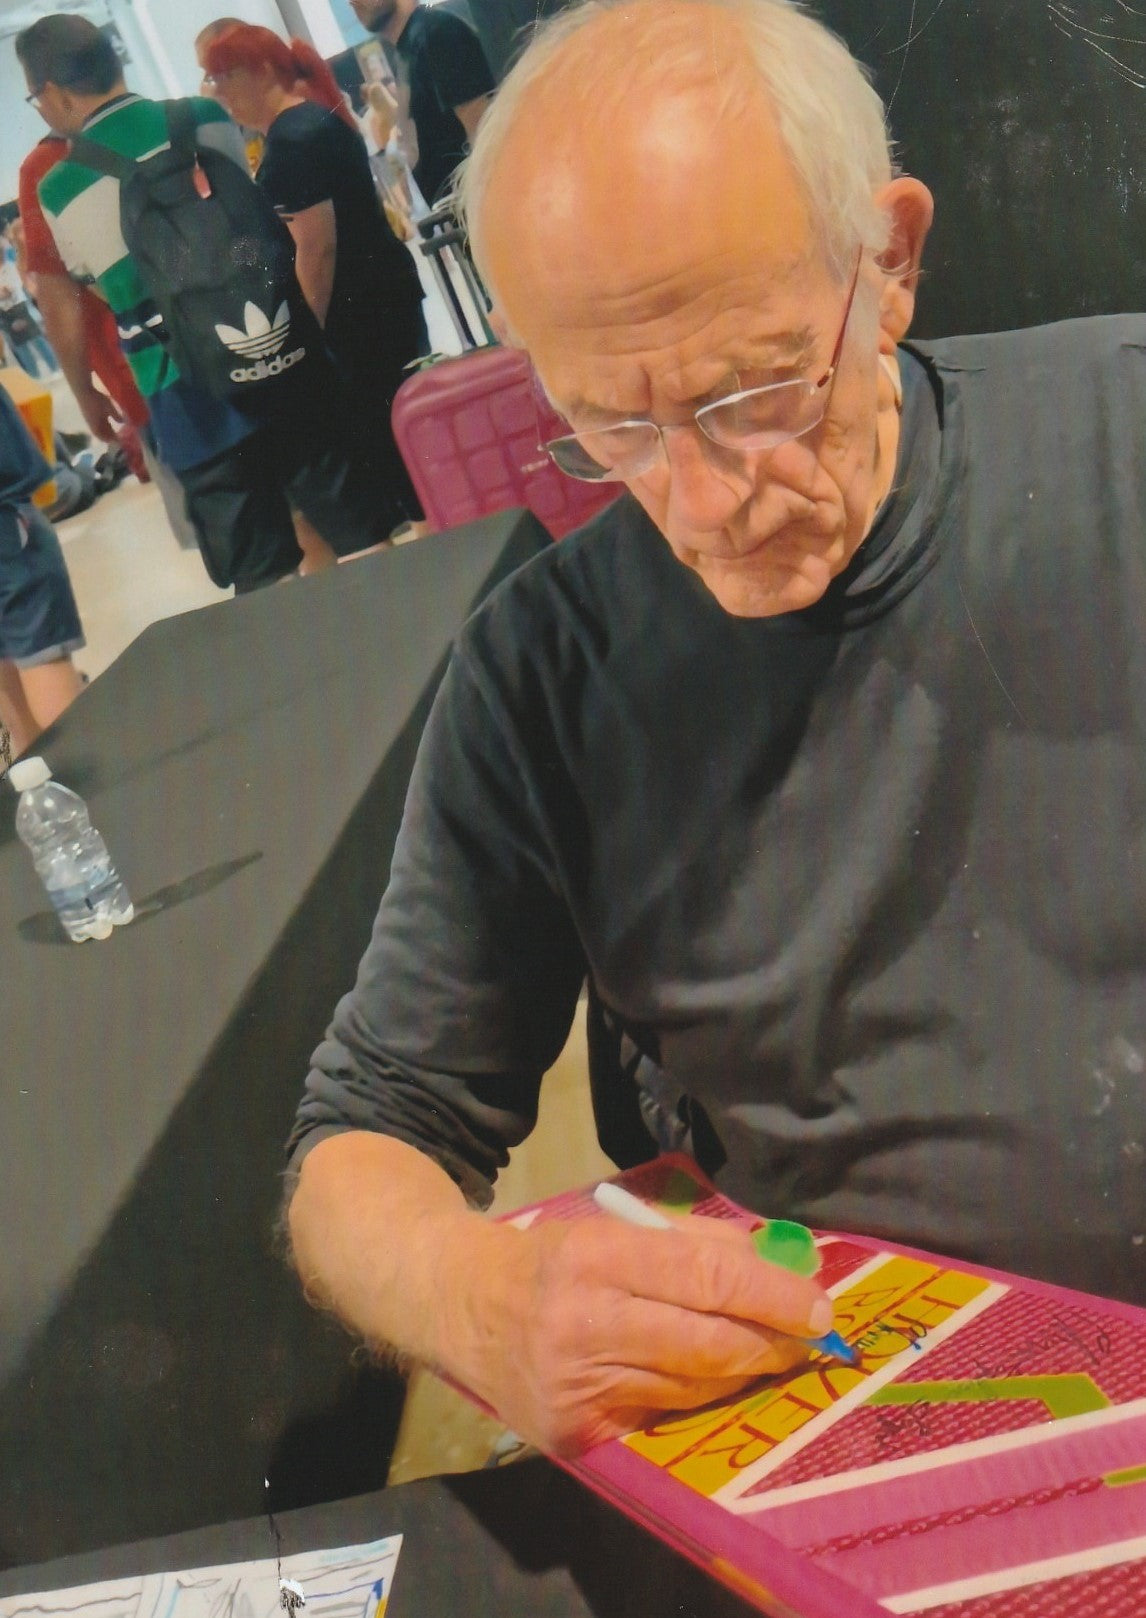 Back To The Future: Christopher Lloyd Signed Hoverboard